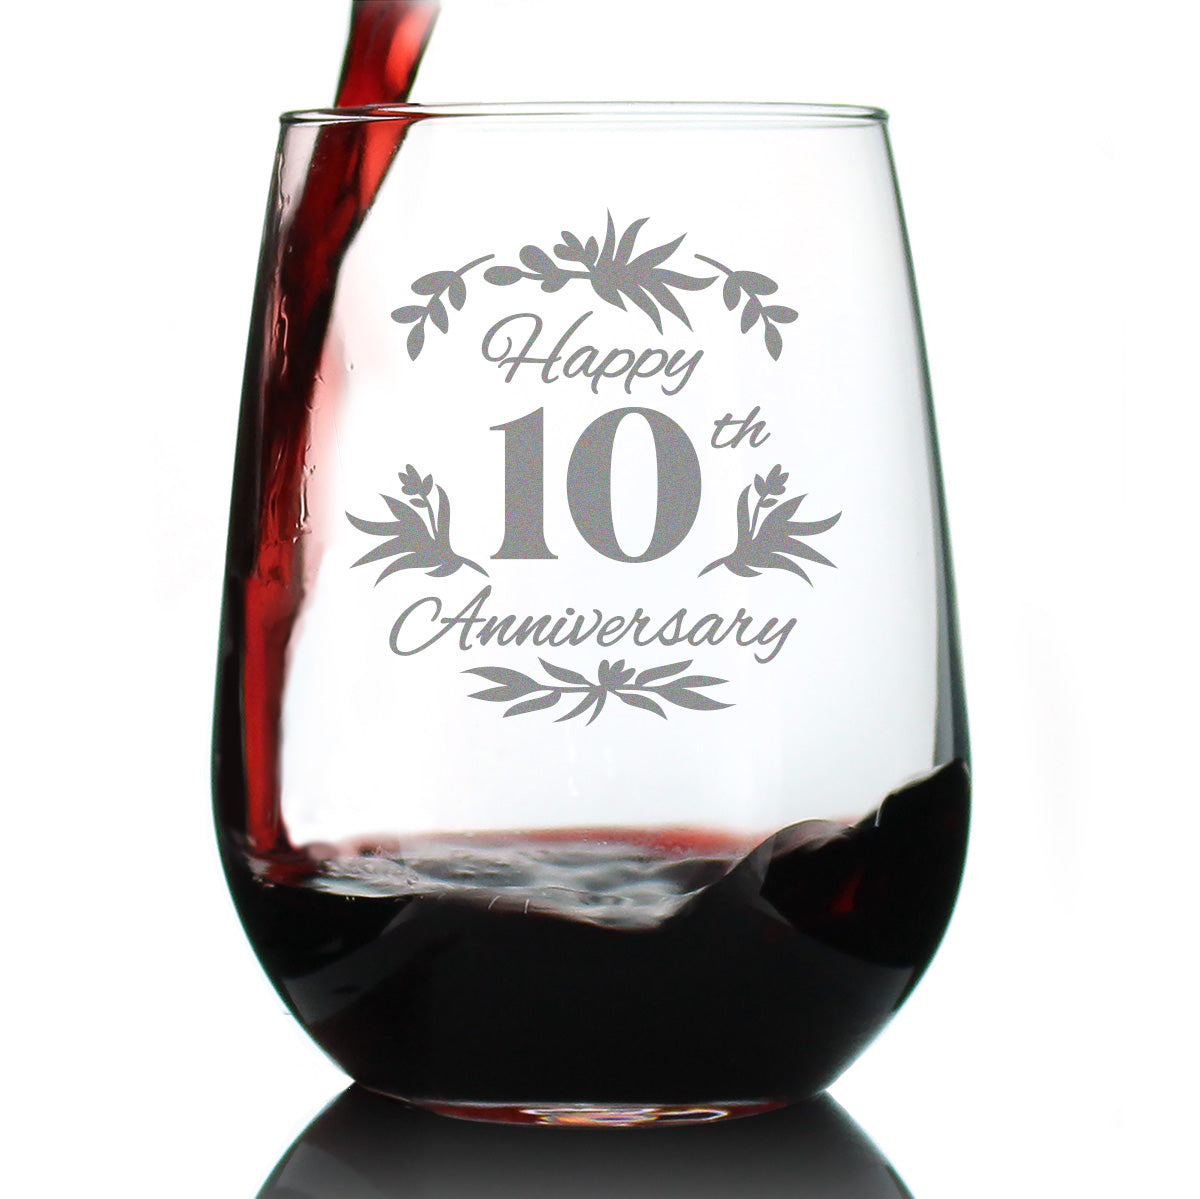 Happy 10th Anniversary - Stemless Wine Glass Gifts for Women & Men - 10 Year Anniversary Party Decor - Large Glasses